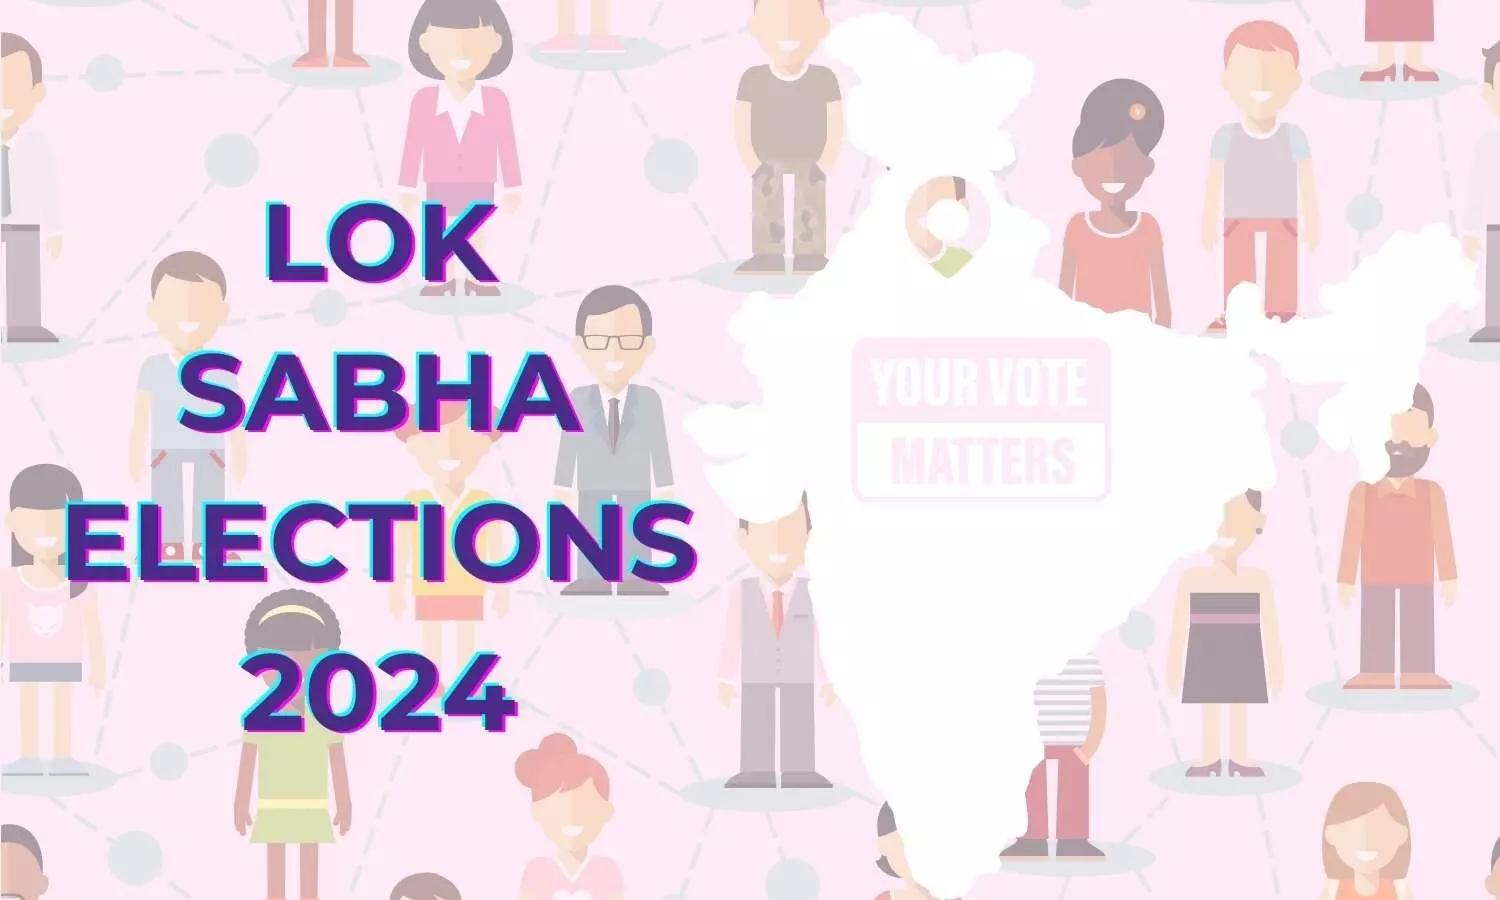 11 Alternative documents to vote in 2024 Lok Sabha Elections without ID